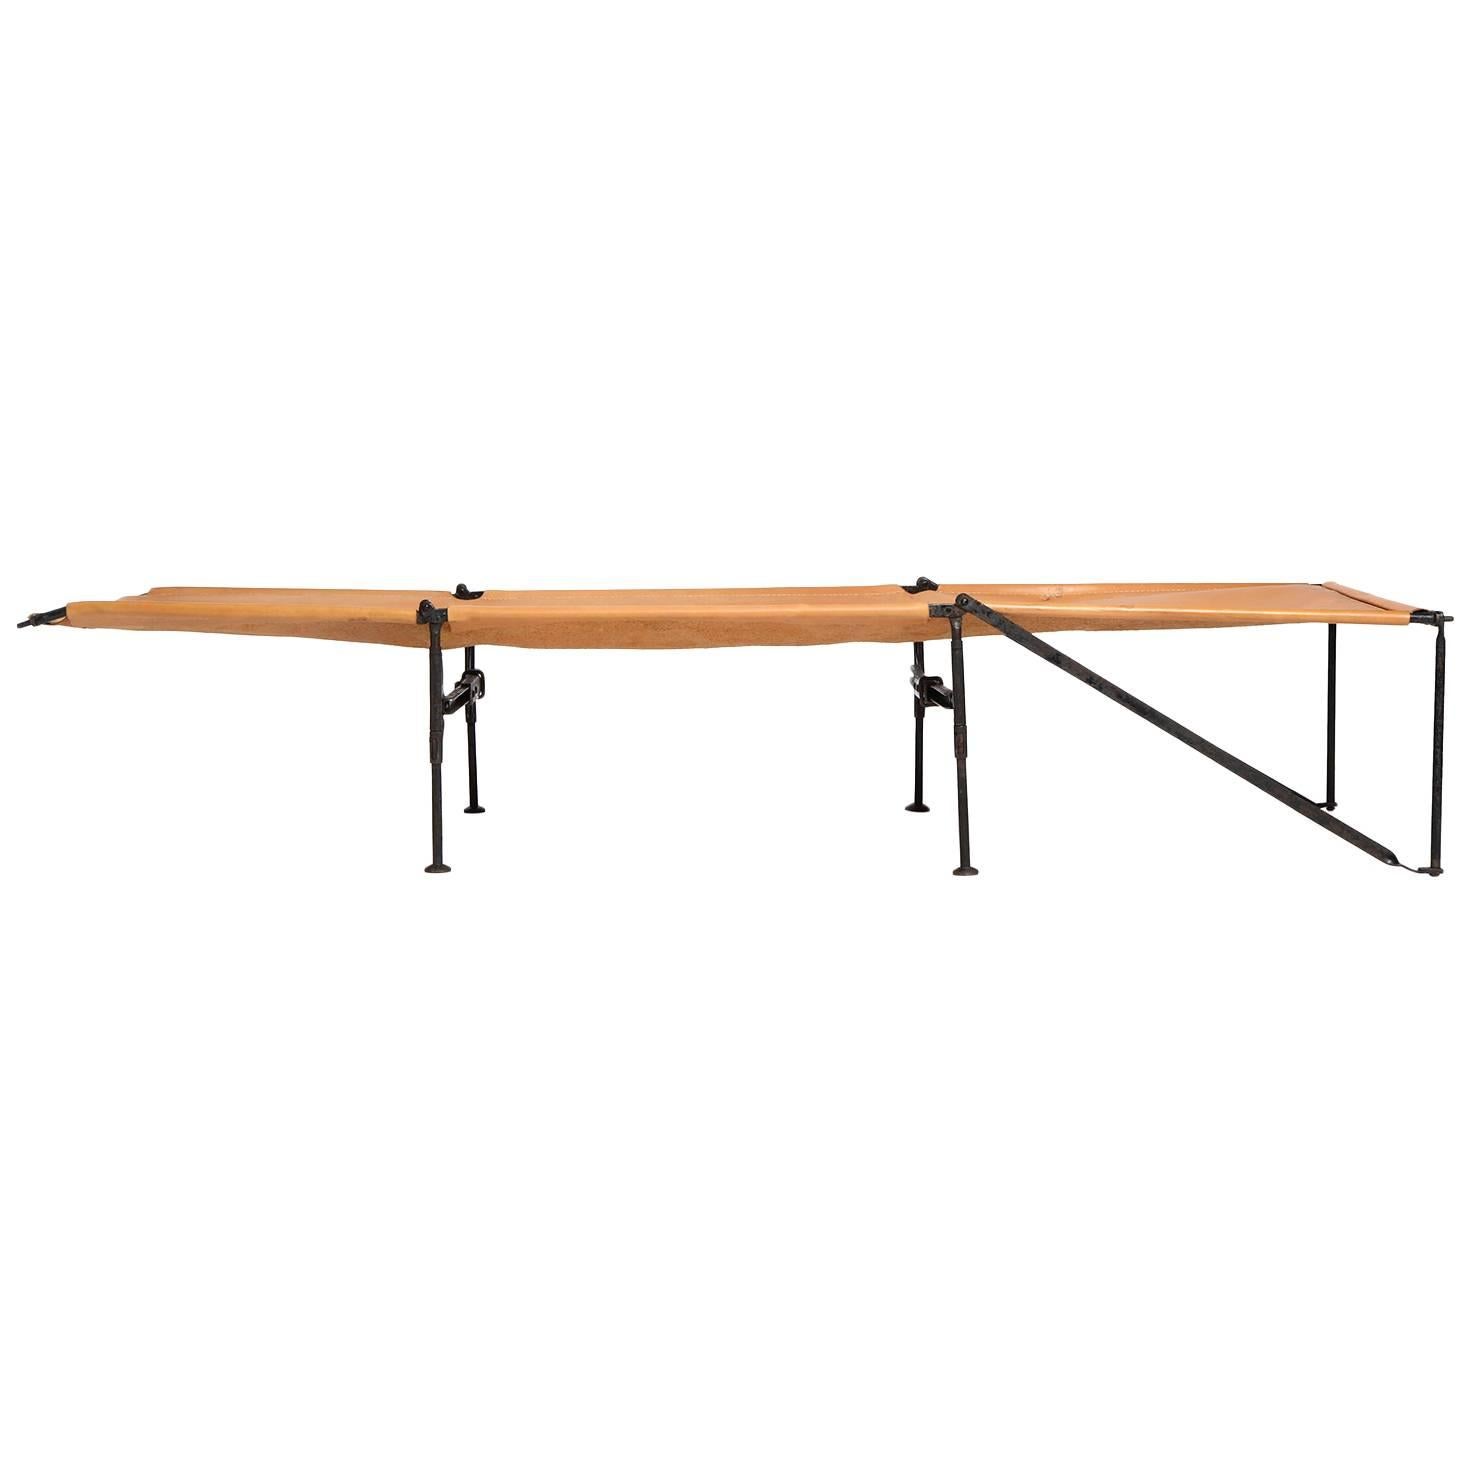  Leather Topped Folding Cot 